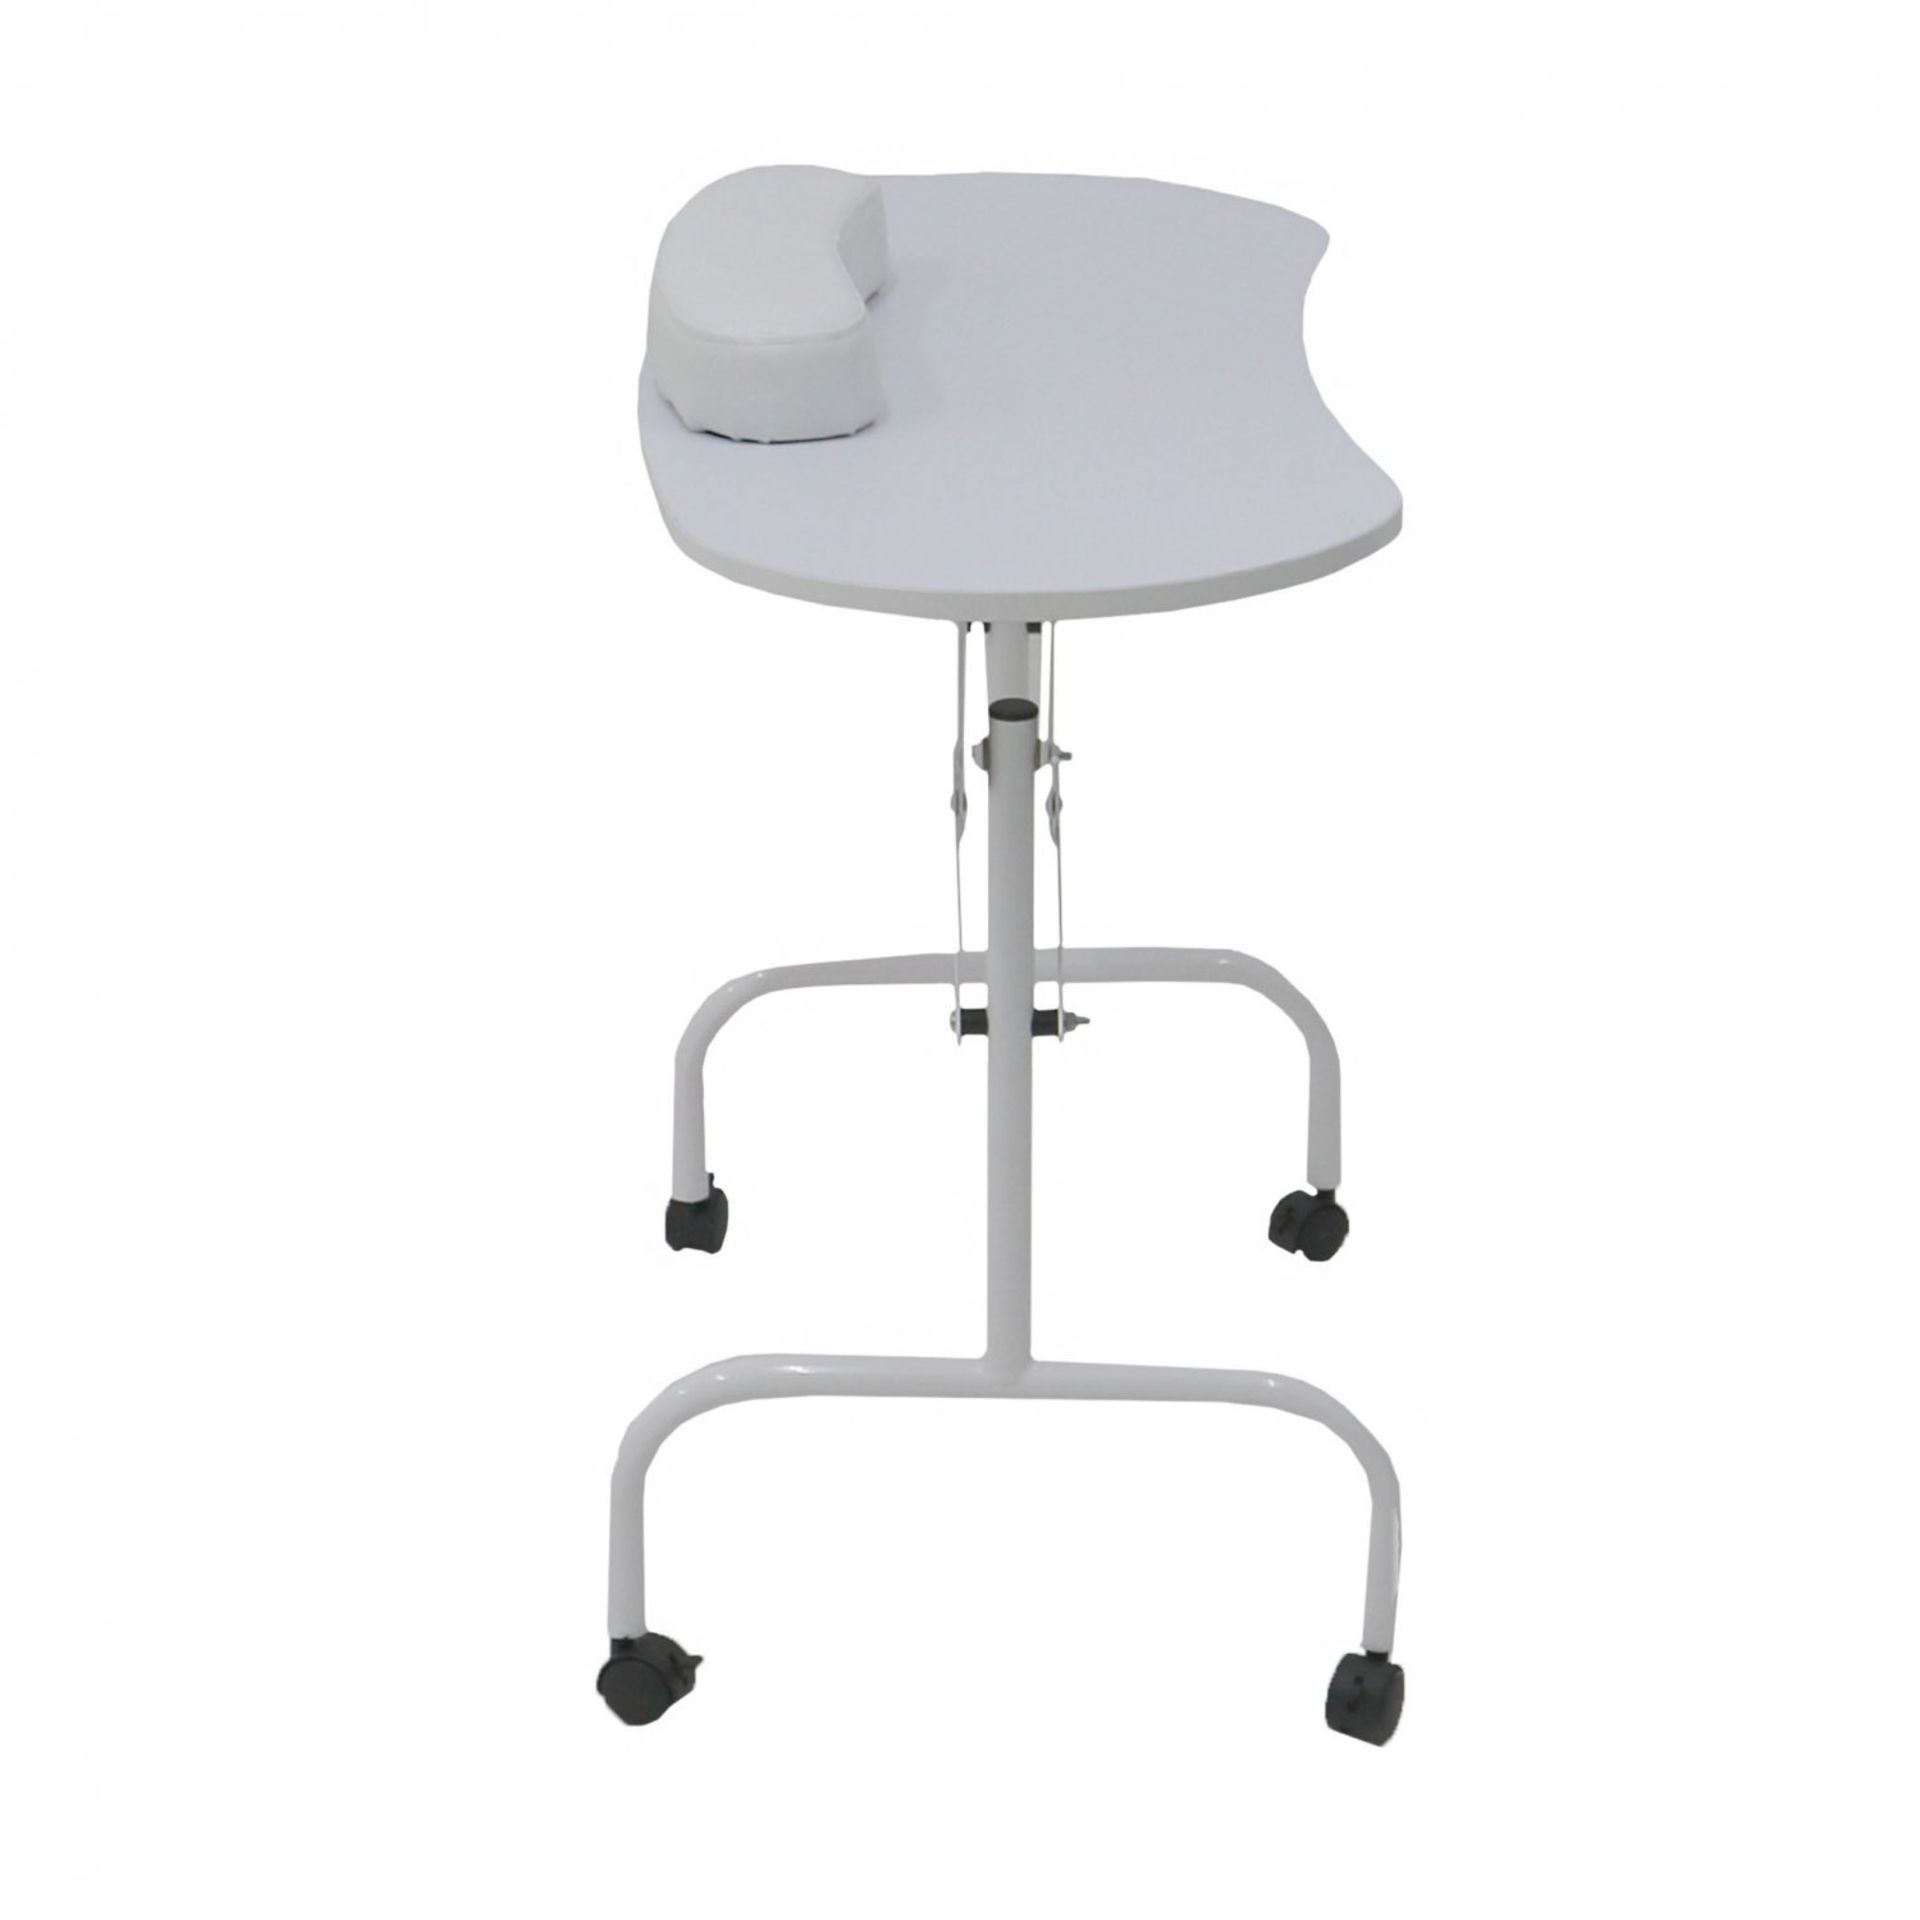 (LF213) Professional White Manicure Table Nail Technician Art Desk Workstation The manicure ... - Image 2 of 2